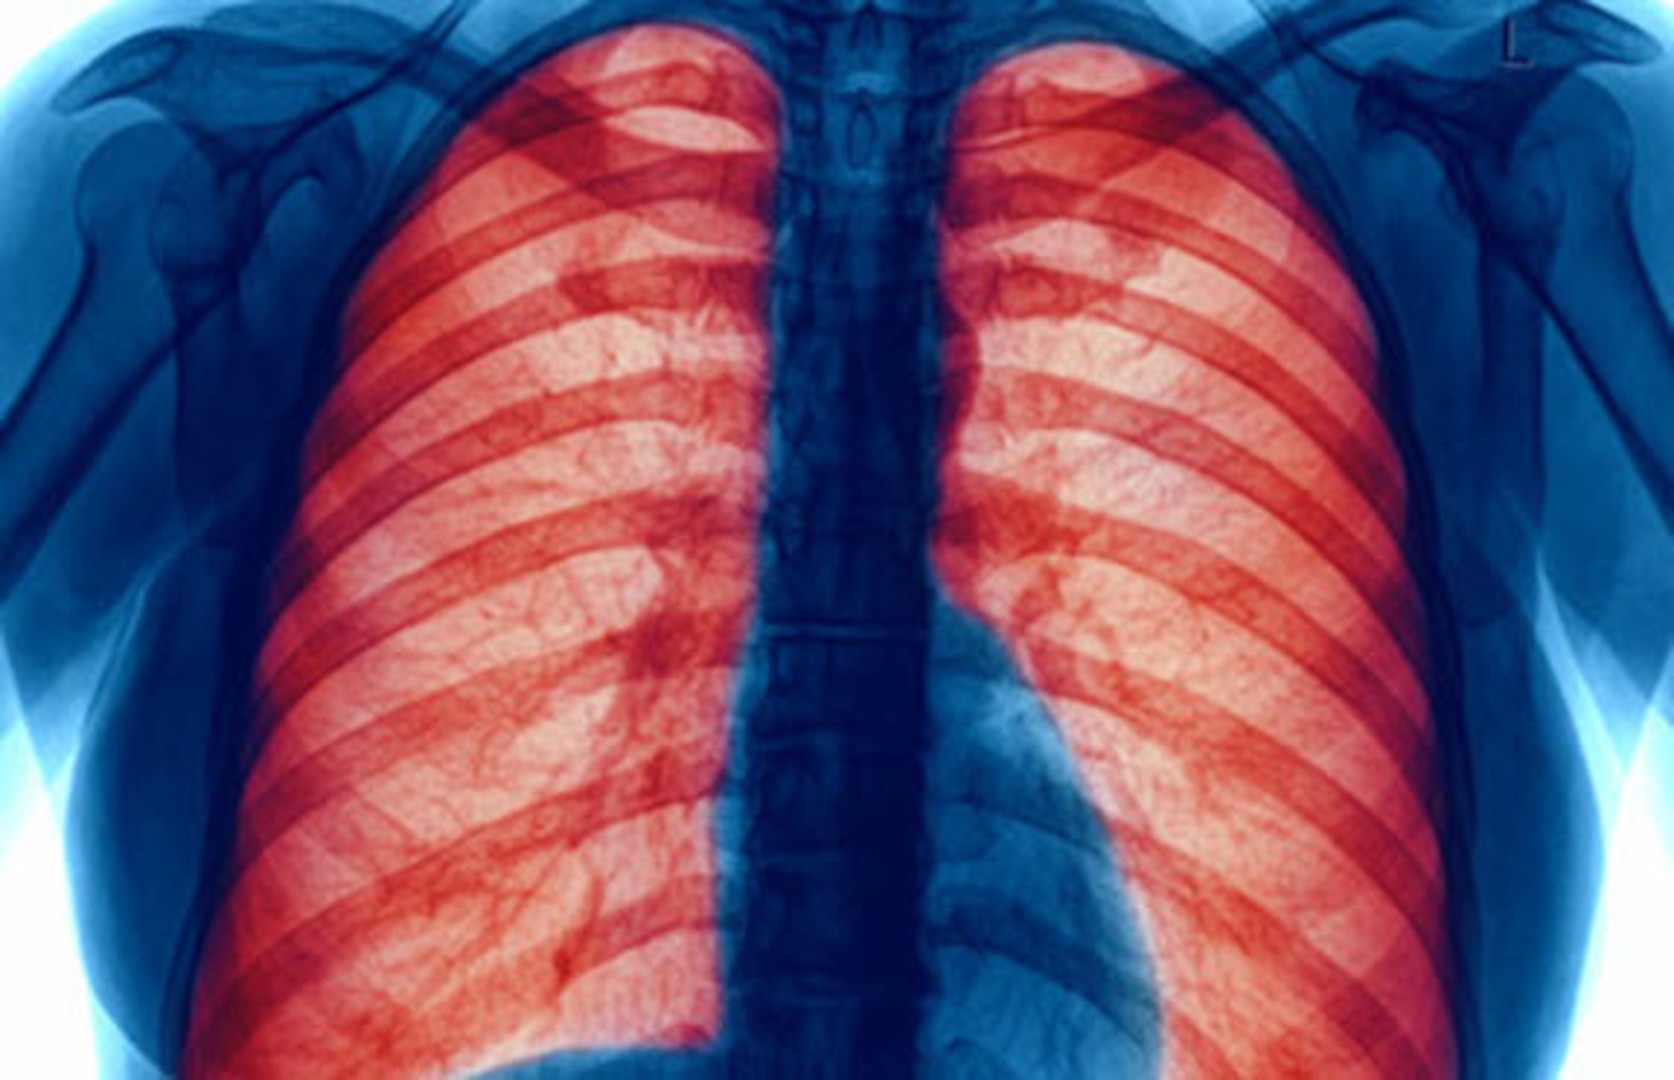 COPD makes breathing difficult for the 16 million Americans who have this disease. Millions more people suffer from COPD but have not been diagnosed and are not being treated, according to the Centers for Disease Control and Prevention (CDC).